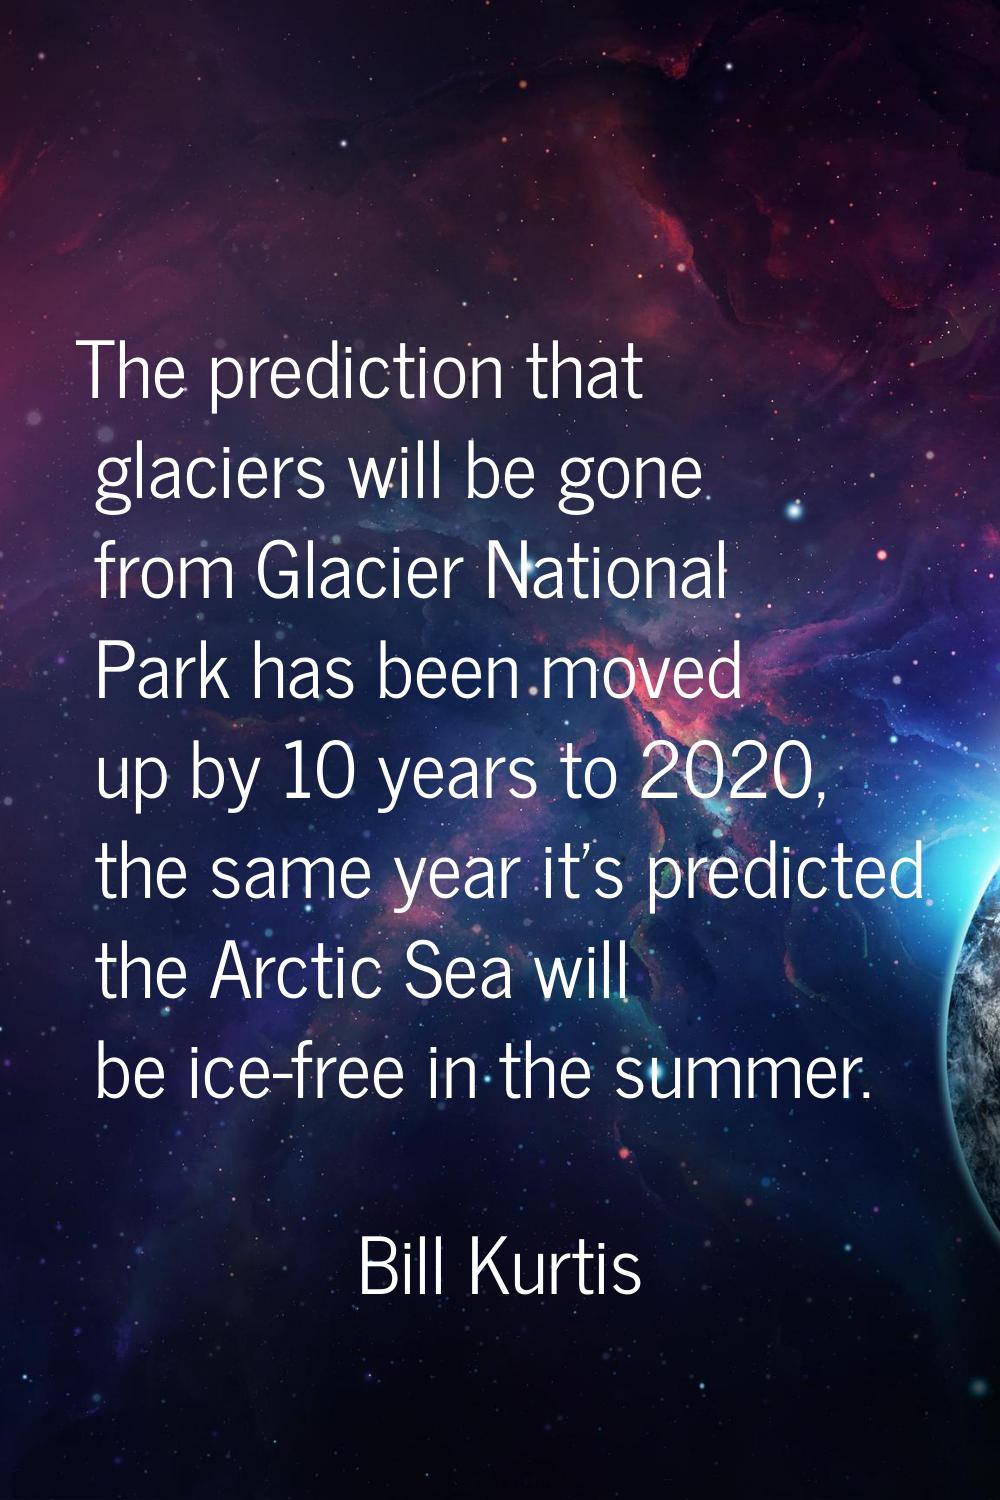 The prediction that glaciers will be gone from Glacier National Park has been moved up by 10 years 